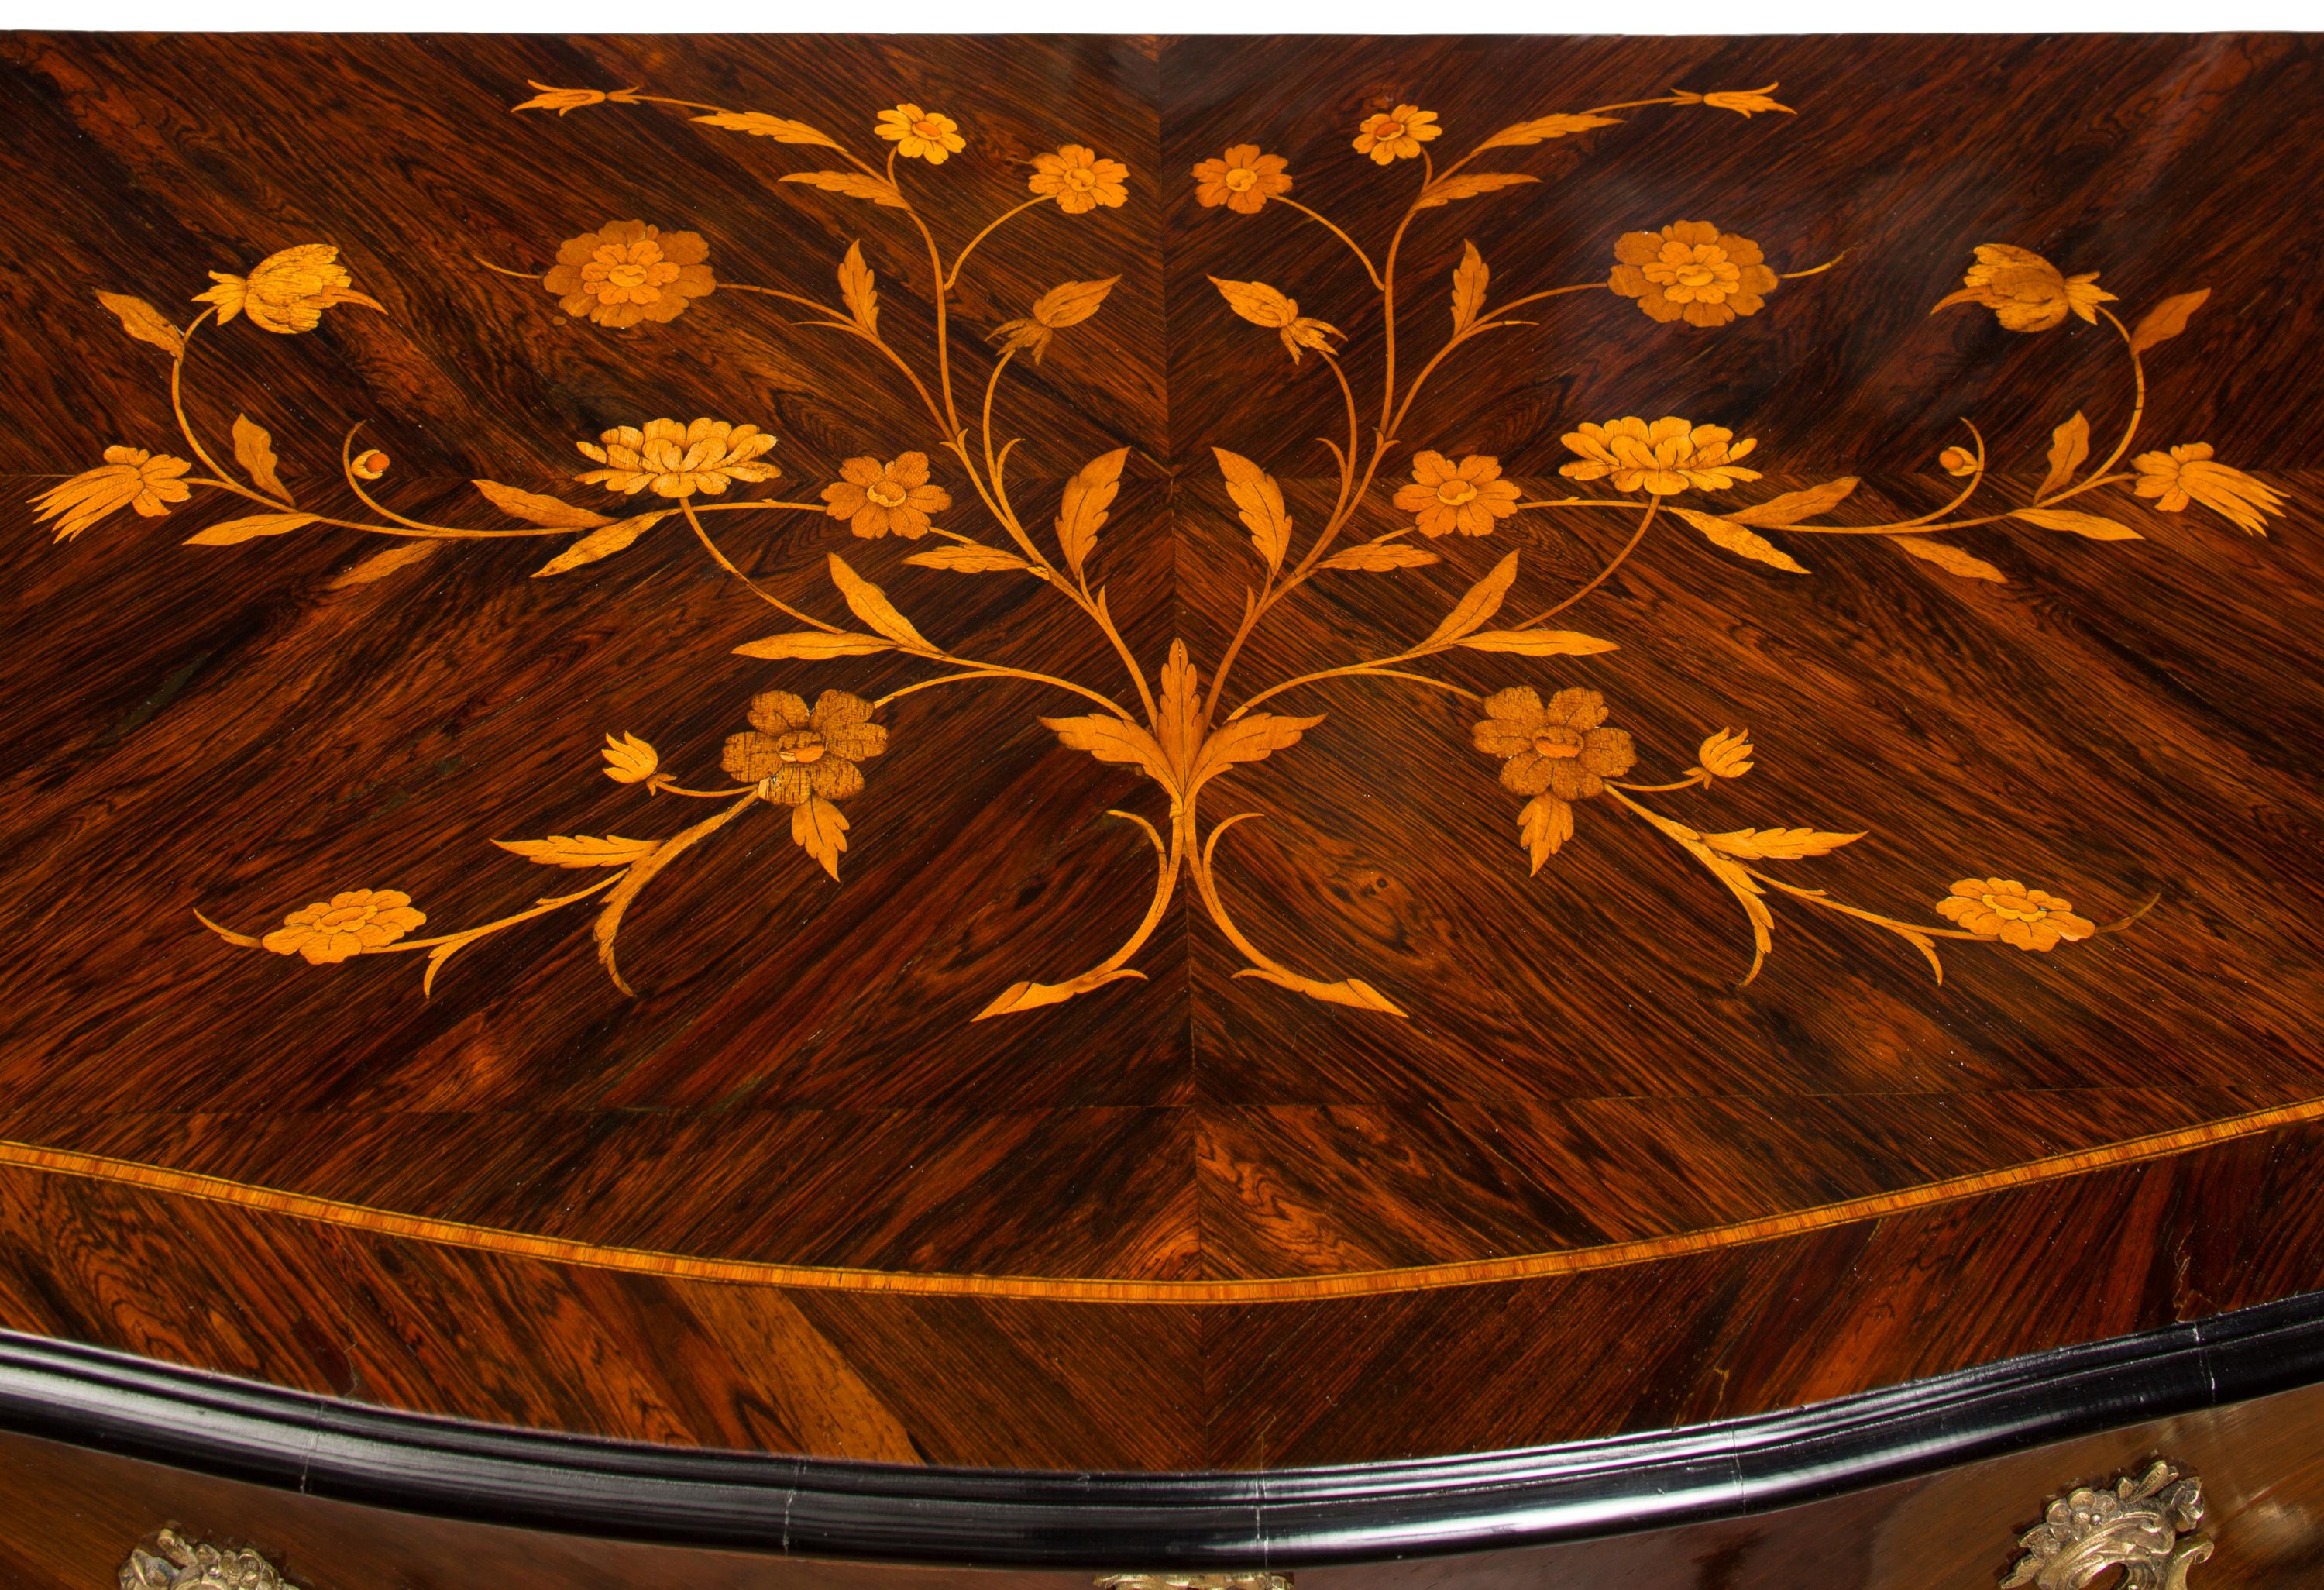 This 19th century French Louis XV style commode has beautifully detailed multi-wood inlay marquetry, including a large floral design on the top, which is of note, as much of the commodes in this style have marble tops. The wood grain veneer on top,